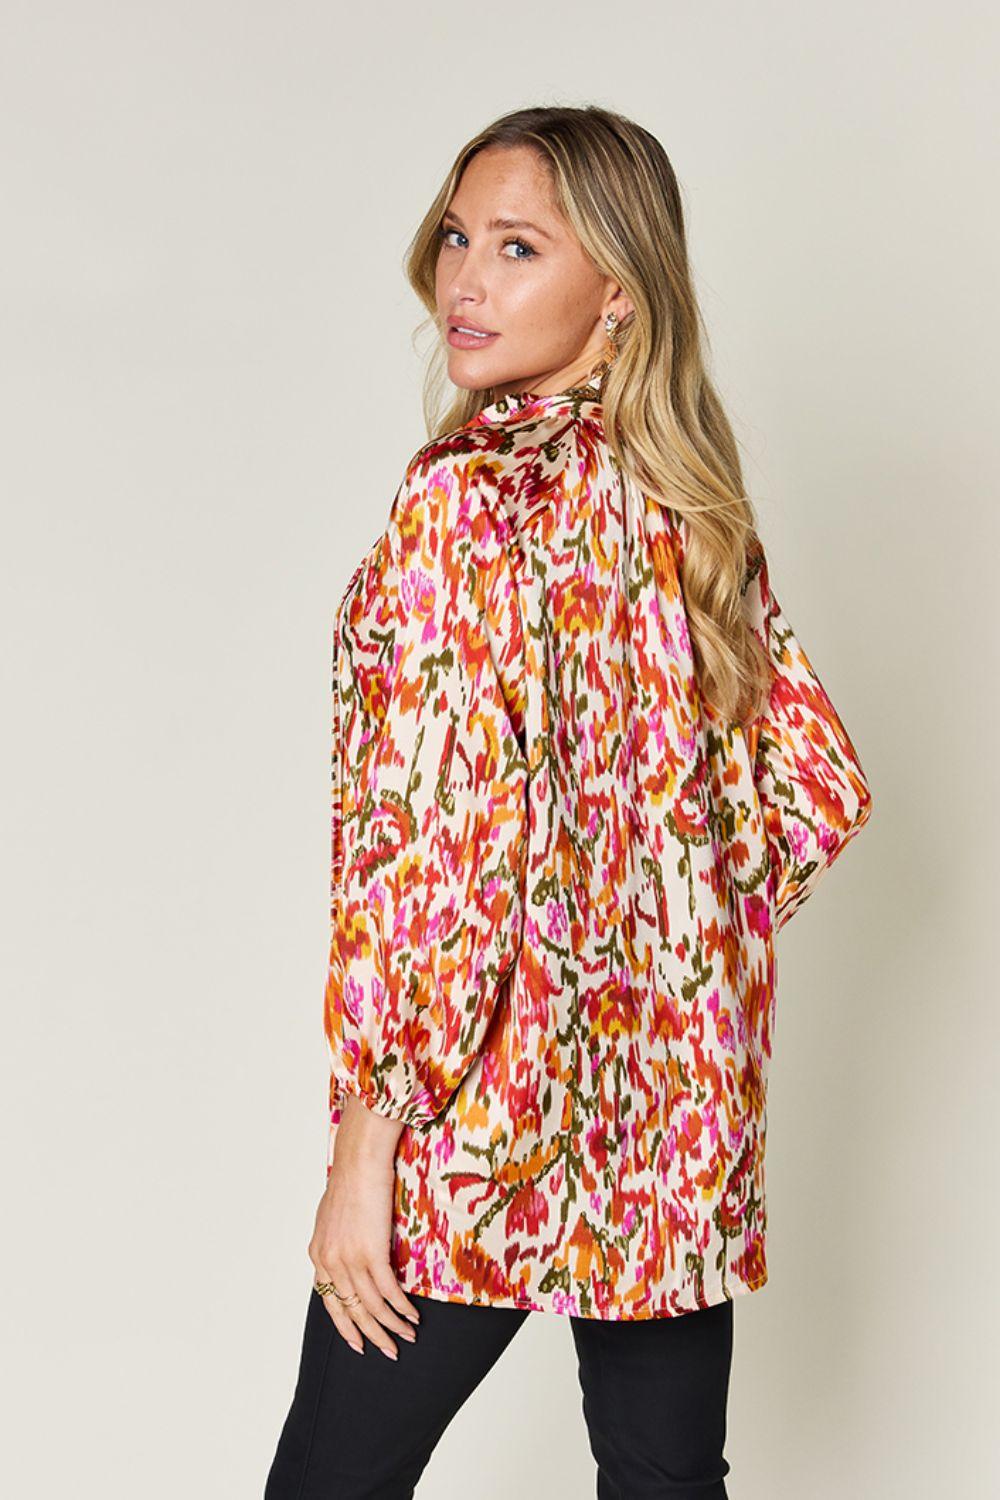 Double Take Full Size Printed Button Up Long Sleeve Shirt Shirts & Tops